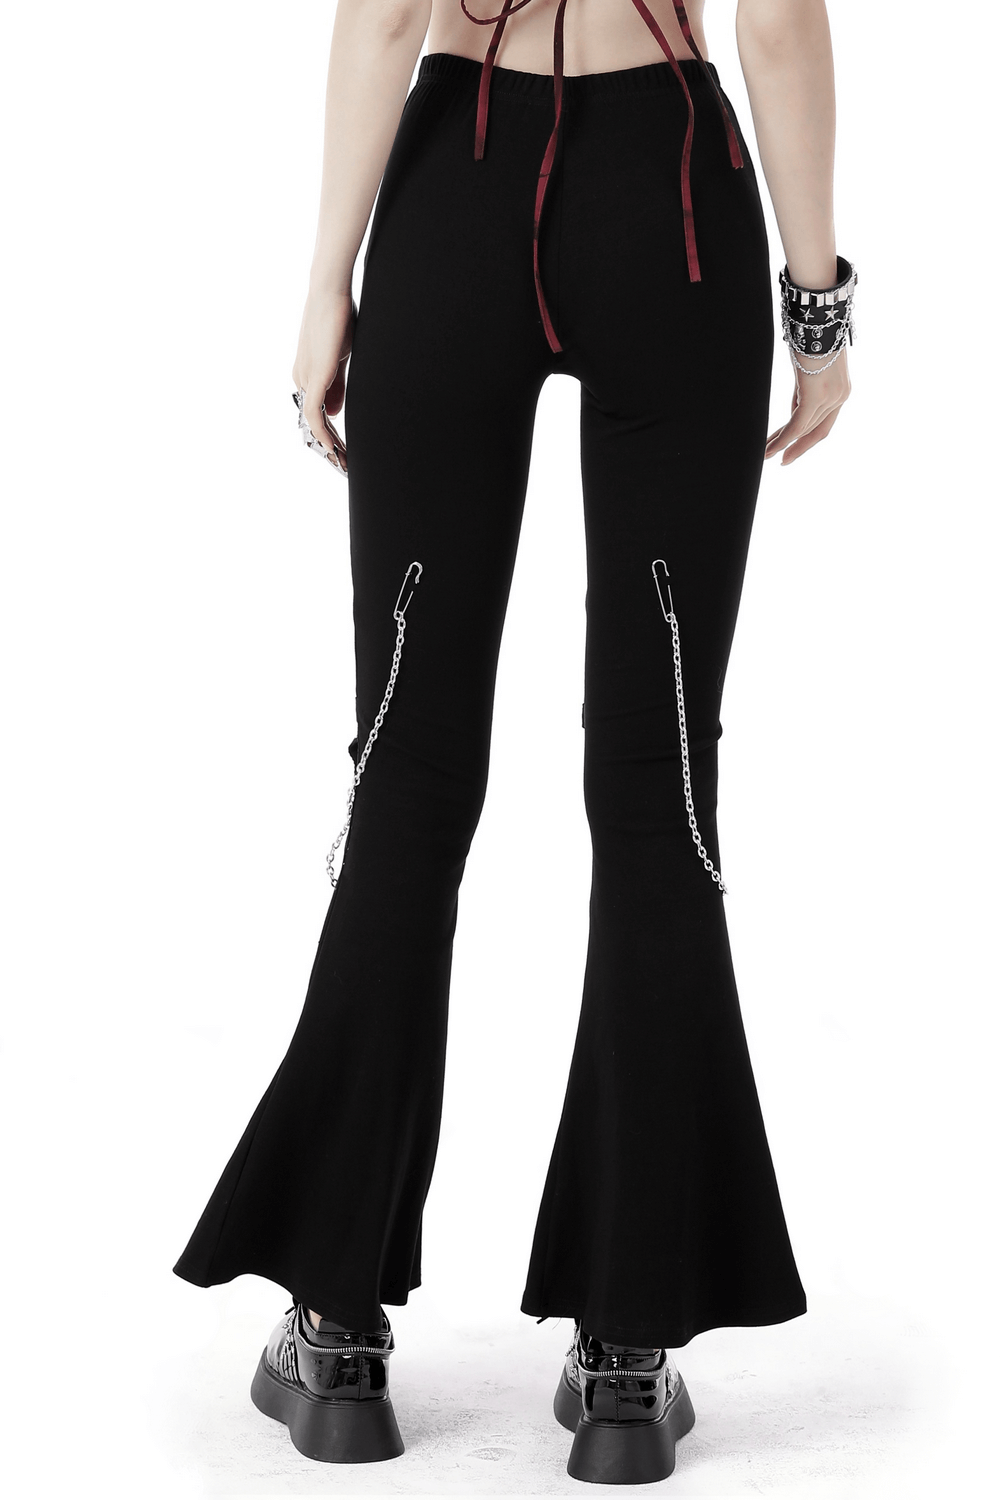 Edgy Black Lace-Up Flare Pants with Chain Detail